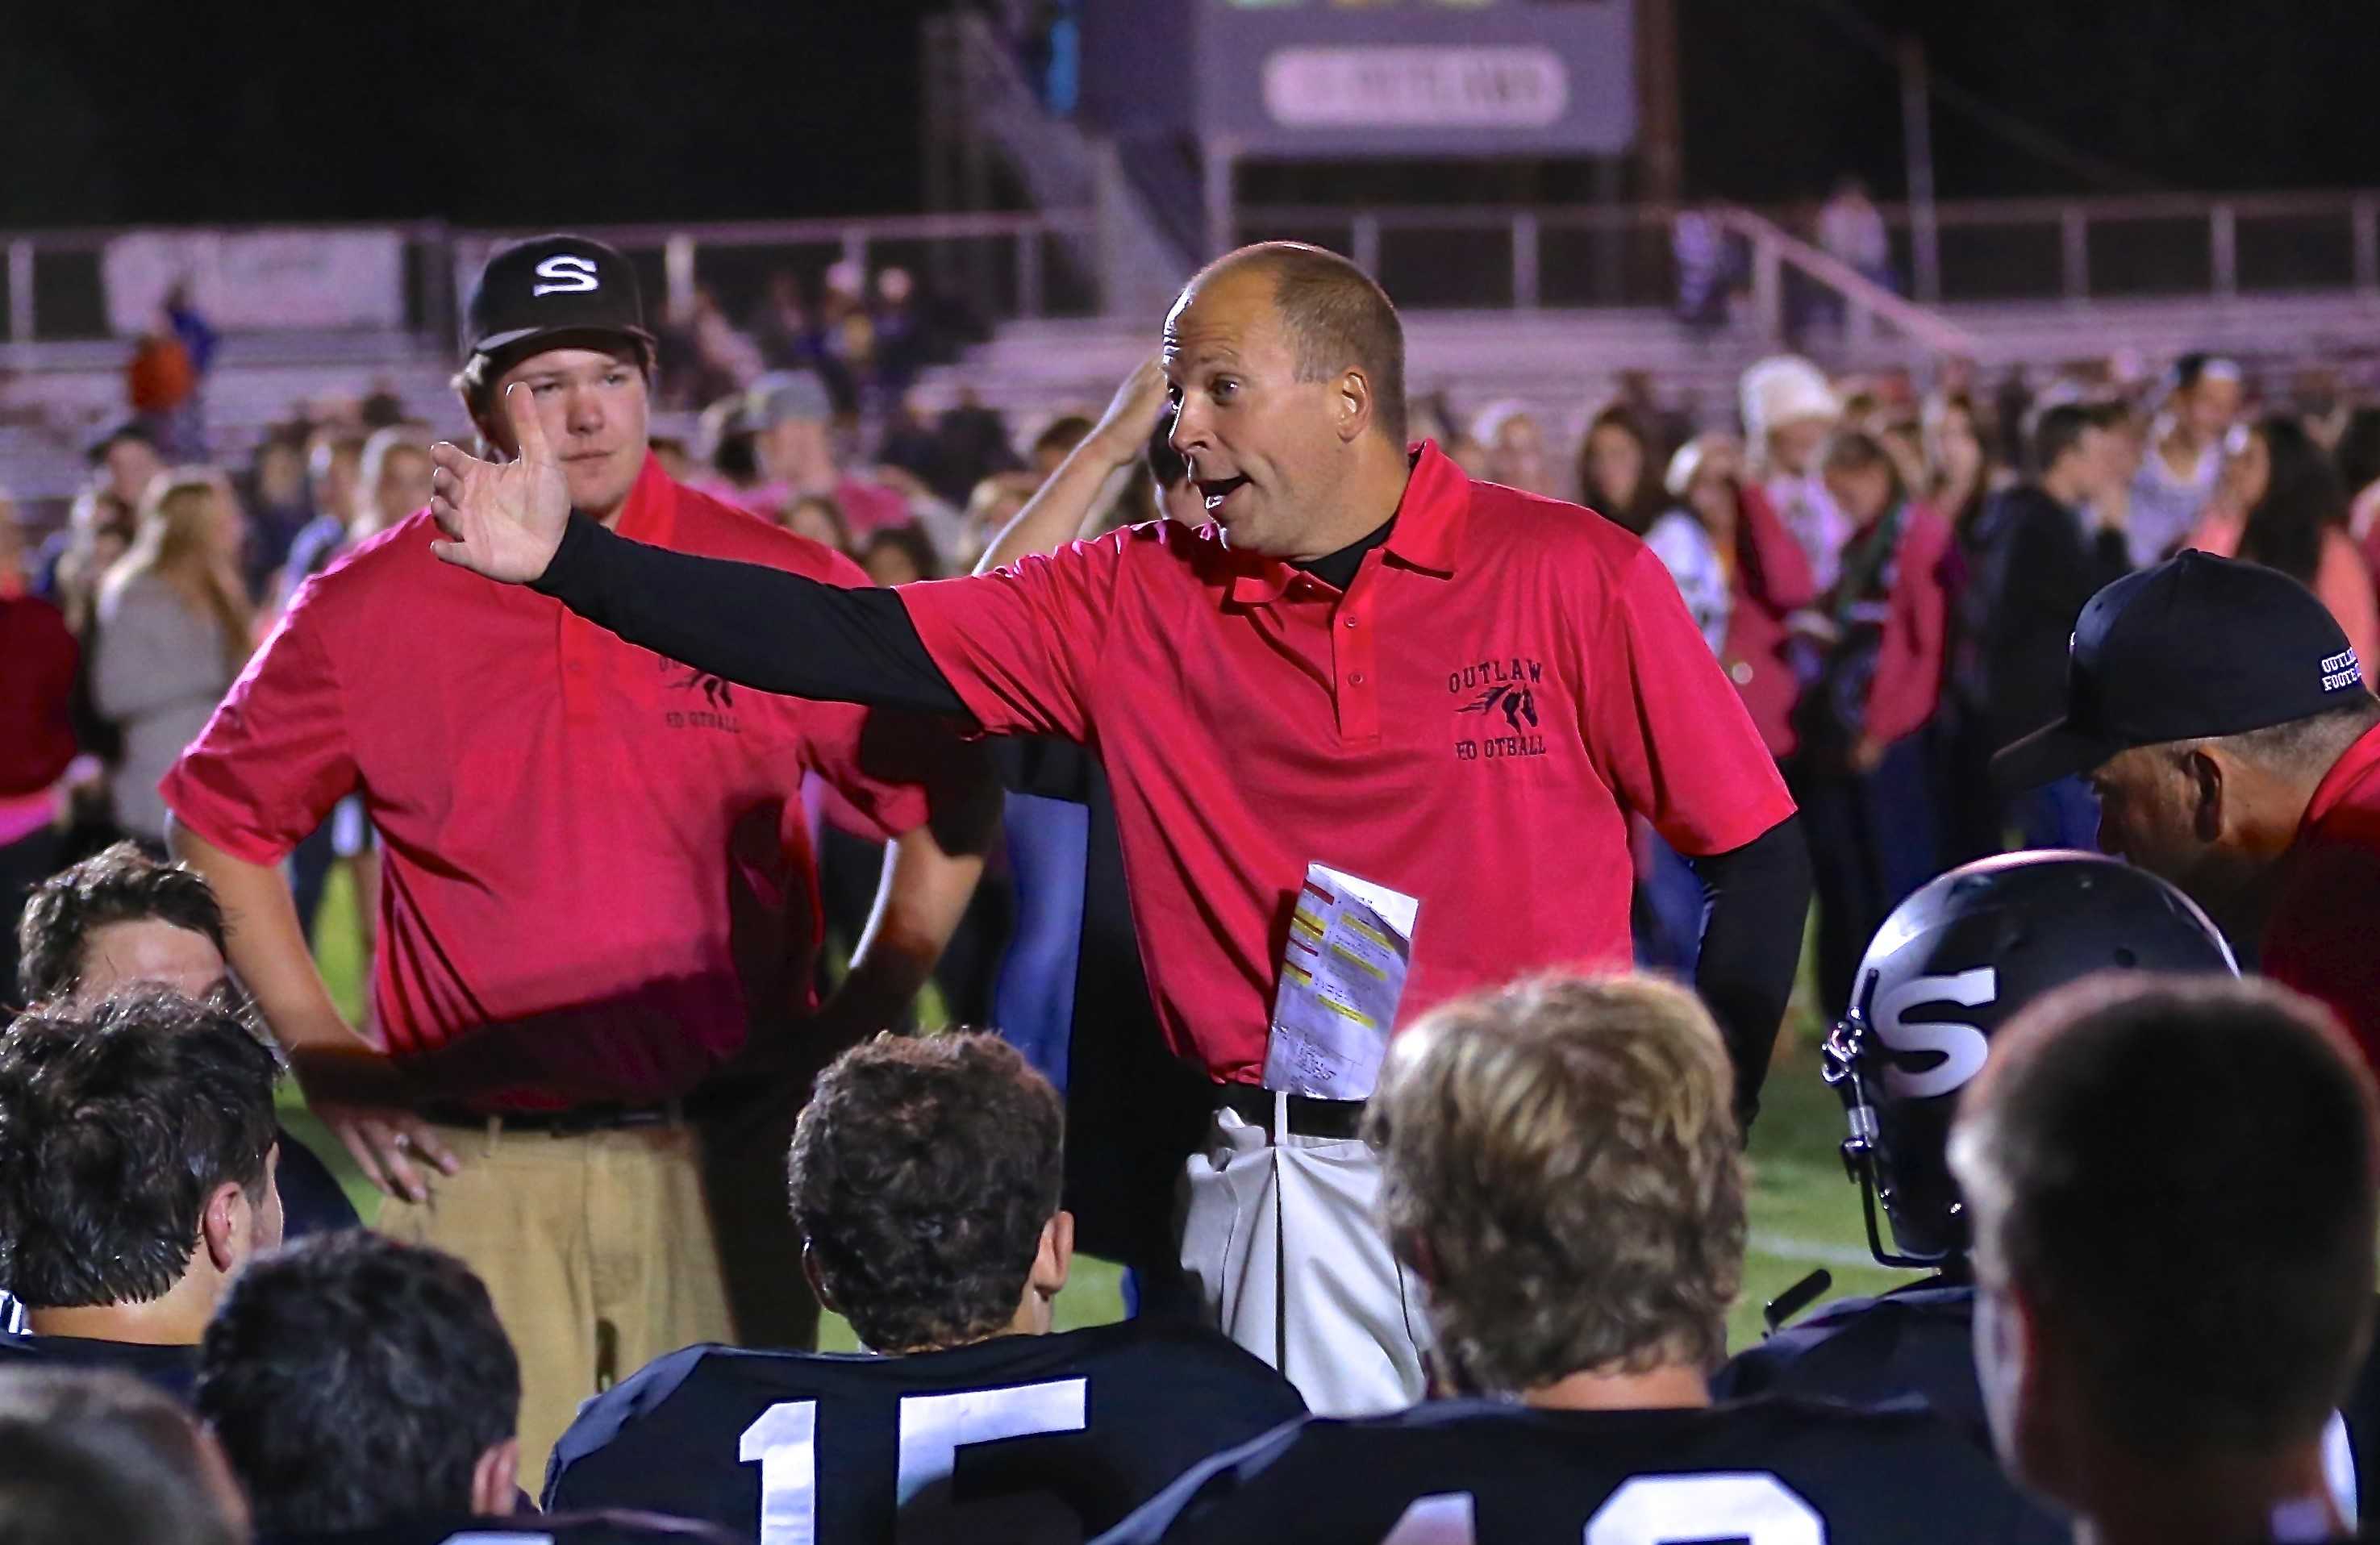 Gary Thorson went 19-9 as the Sisters football coach from 2014 to 2016. (Photo courtesy Outlaws Photography)